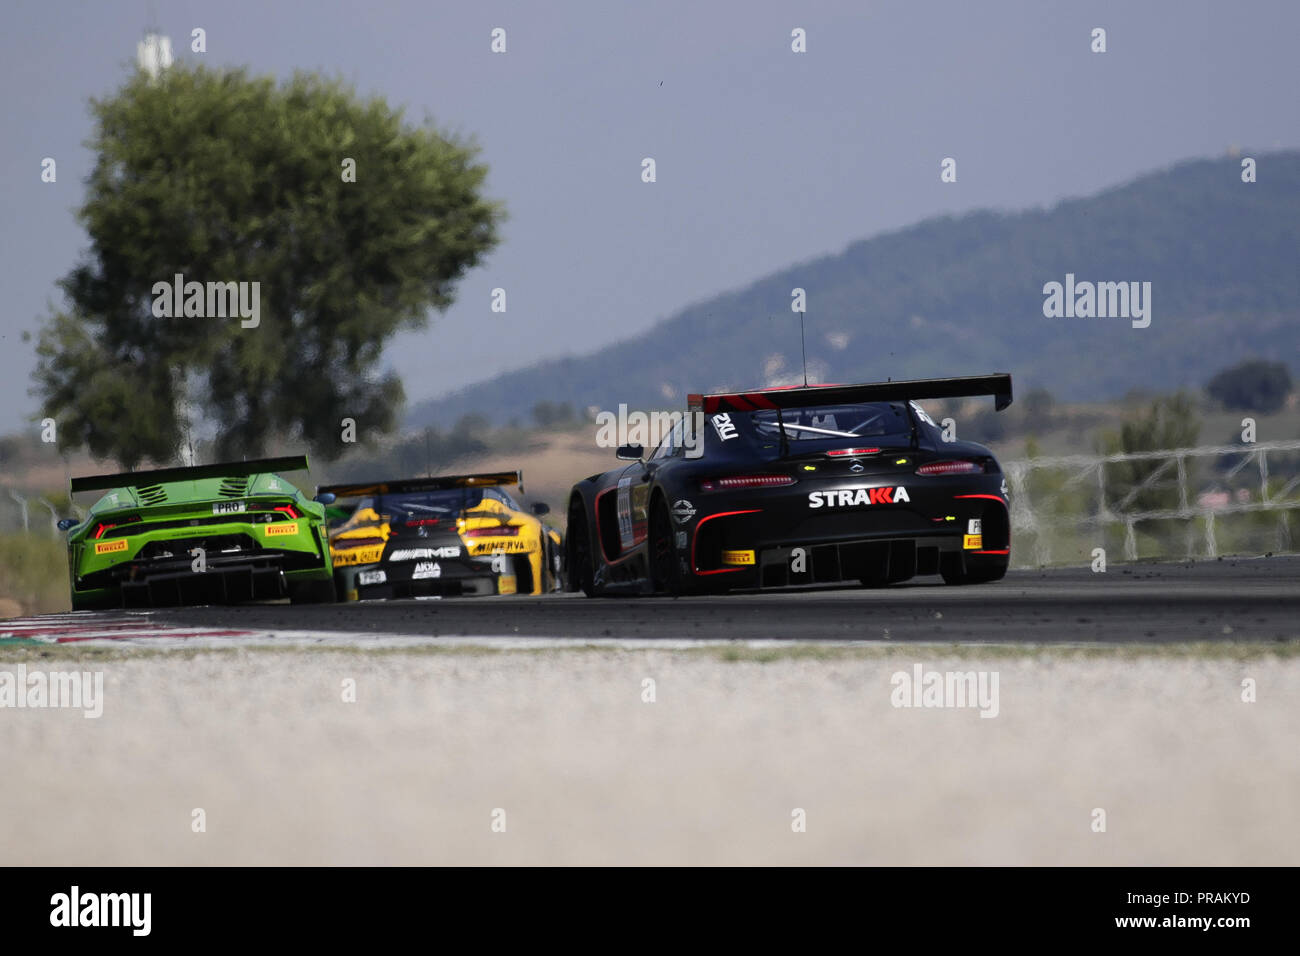 Barcelona, Spain. 30 September 2018. Blancpain GT Endurance Series; 62 MARTIN Maxime, (bel), BAUMANN Dominik (aut), KIRCHHOFER Marvin (deu), AF Racing AG/R-Motorsport Aston Martin V12 GT3 and 44 VIETORIS Christian, (deu), ROWLAND Oliver (gbr), FRAGA Felipe (bra), Strakka Racing Mercedes AMG GT3, seen fighting for position in his group during the first step of the race. Credit: Eric Alonso/SOPA Images/ZUMA Wire/Alamy Live News Stock Photo